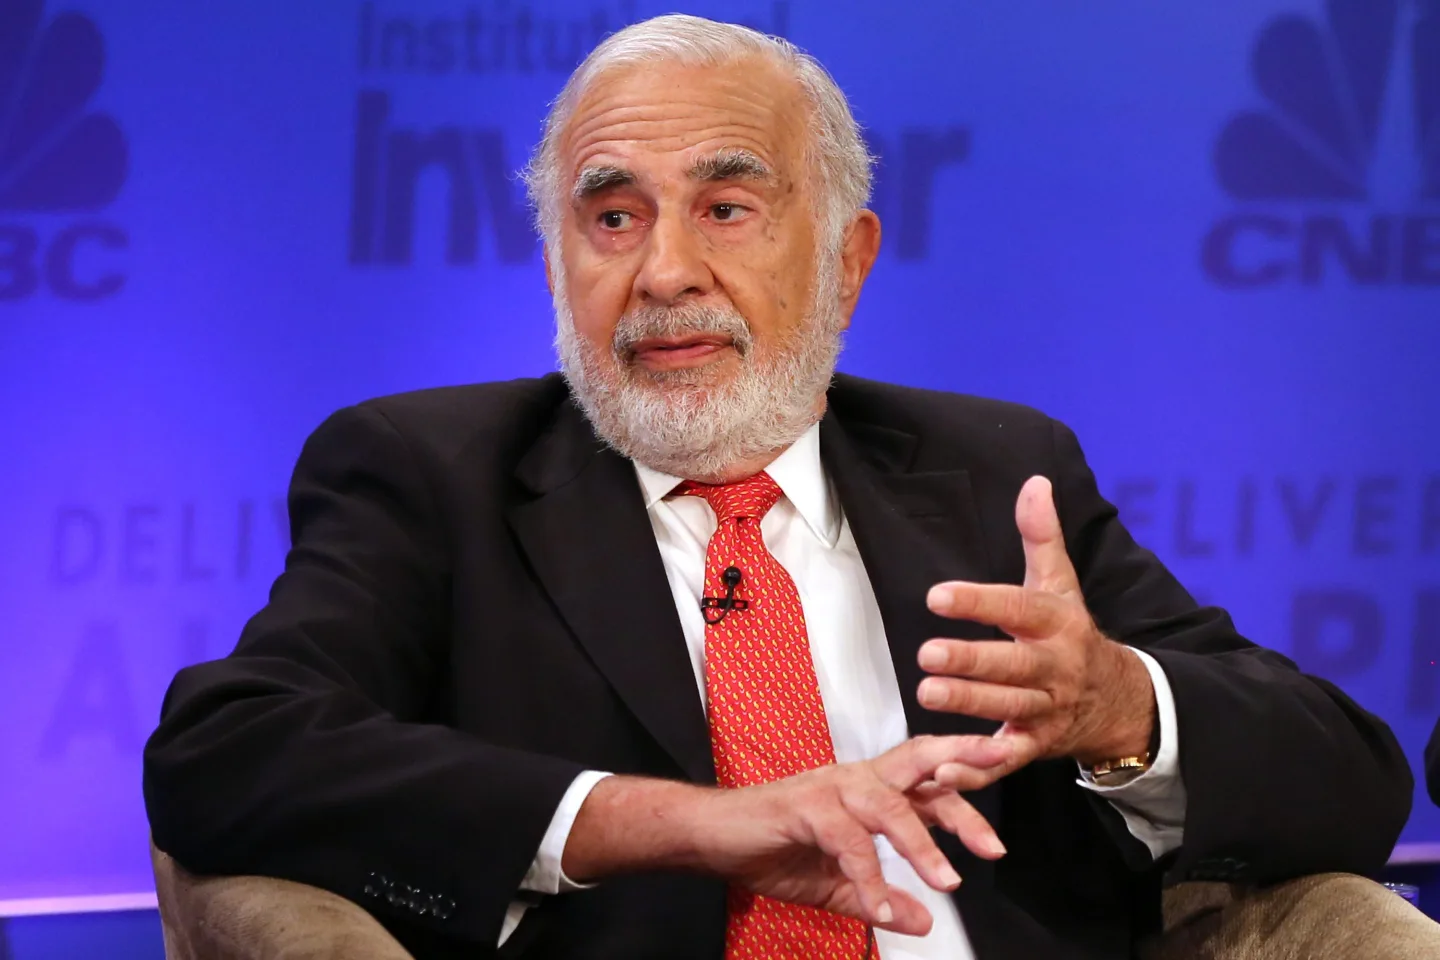 Carl Icahn の投資経験から何を学べますか?ゲッティ イメージズソースによる写真 https://fortune.com/2022/09/22/top-investor-carl-icahn-warns-inflation-recession-worst-yet-to-come-stock-market-roman-empire/